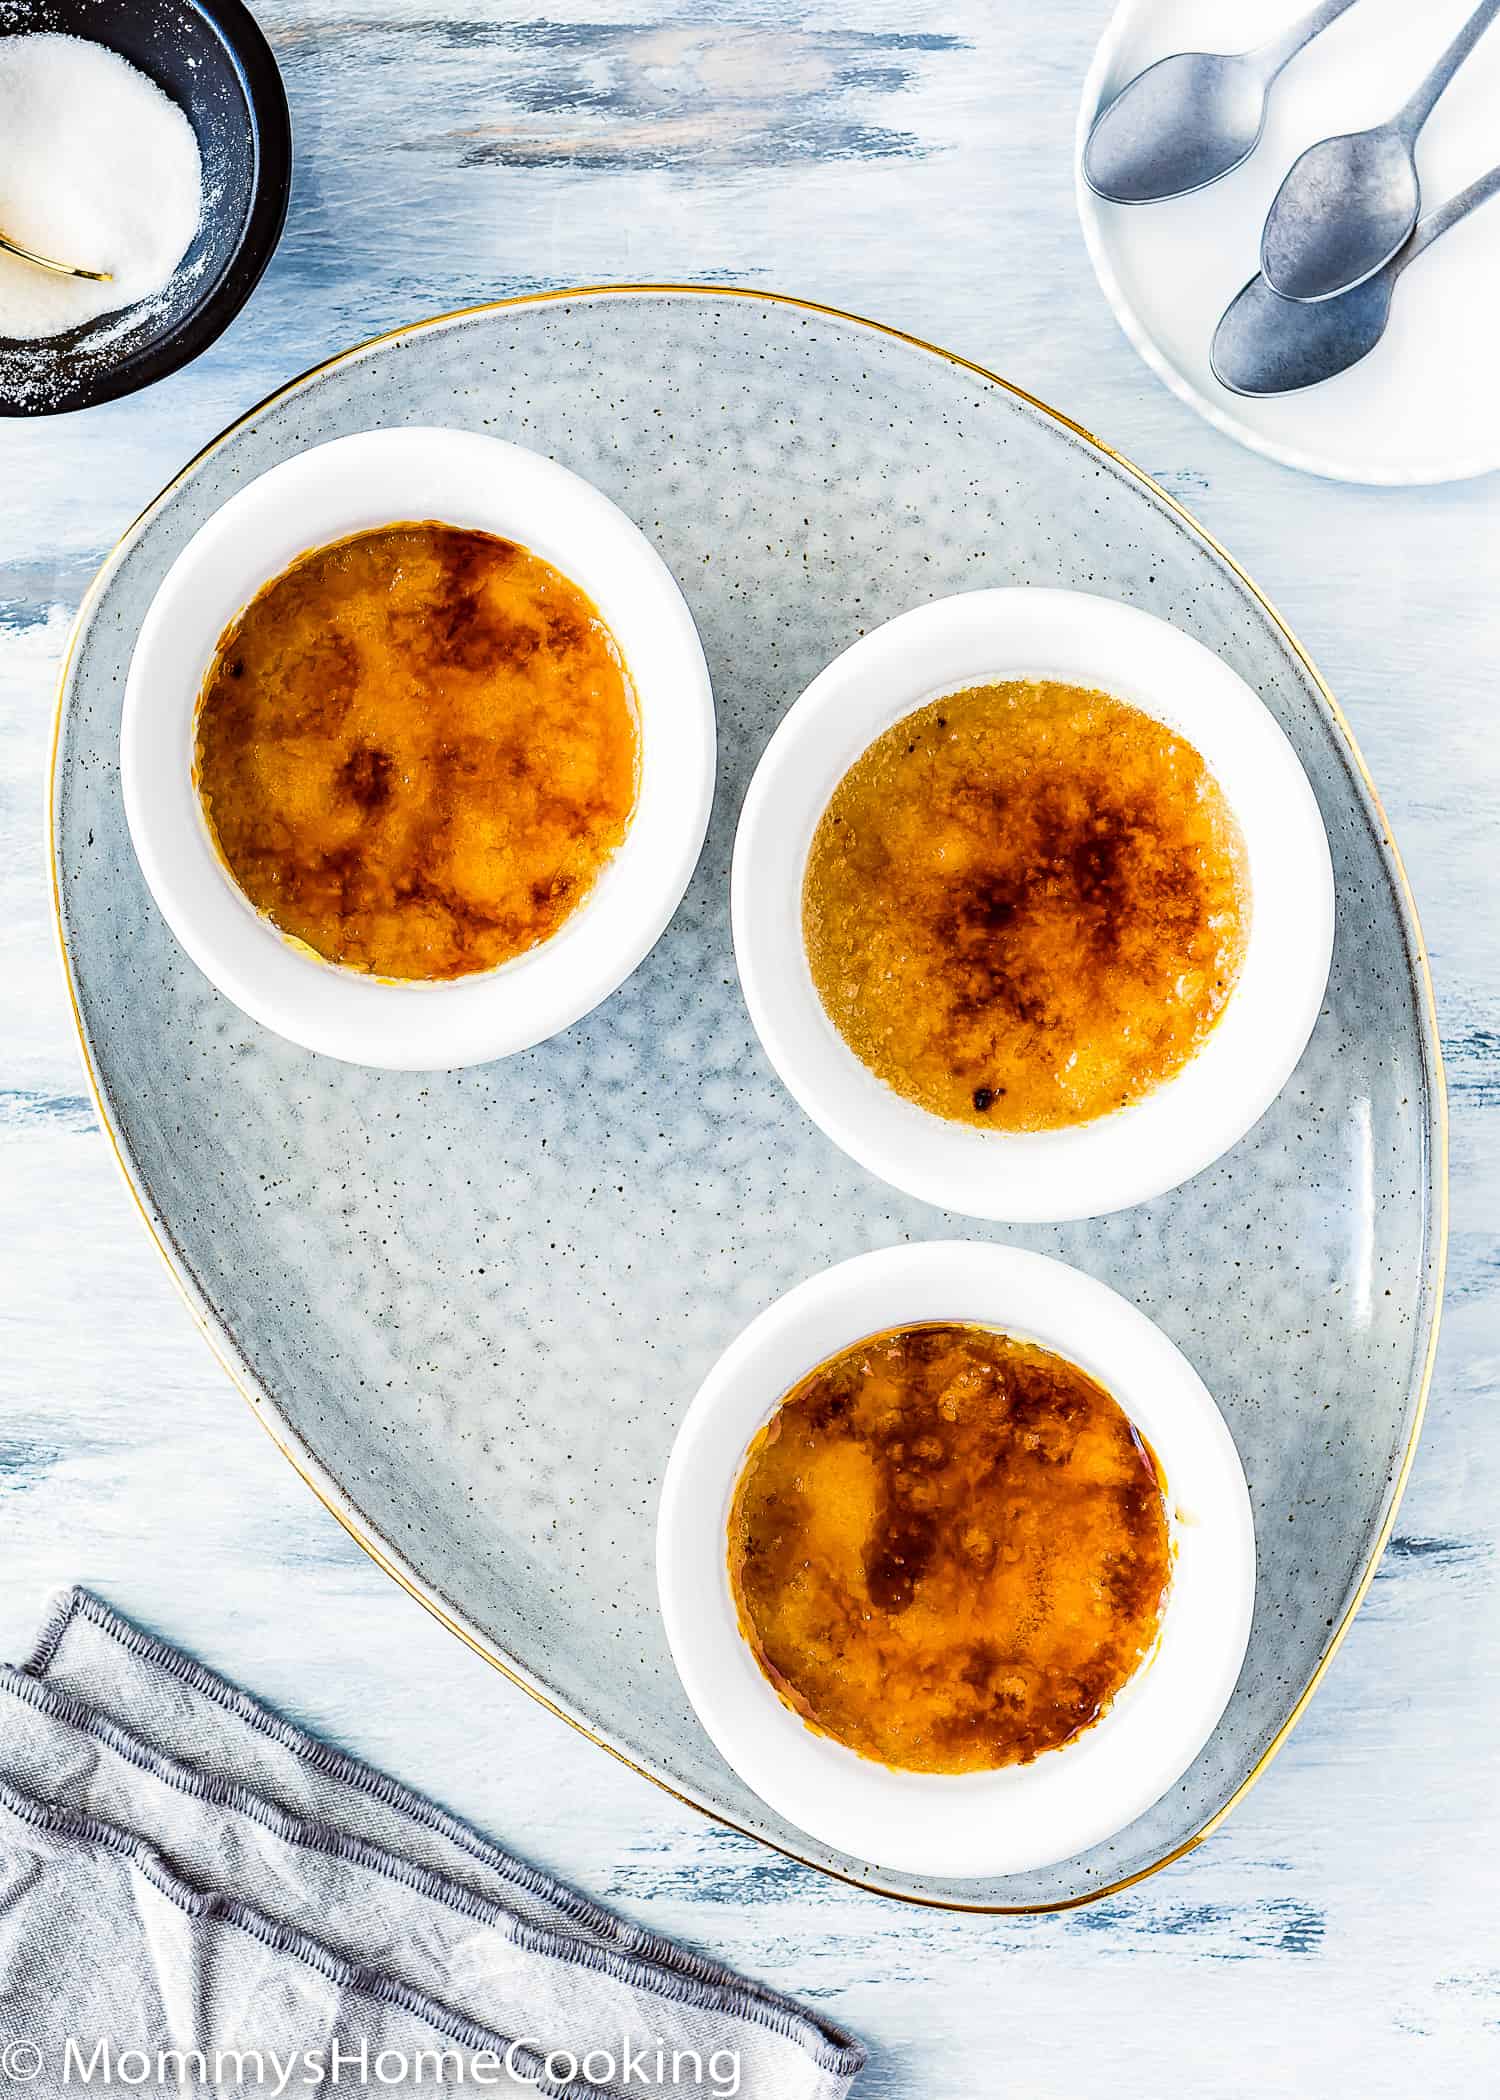 three egg-free creme brulee with a sugar caramelized top over a blue serving plate with a grey kitchen towel on the side and three spoons.